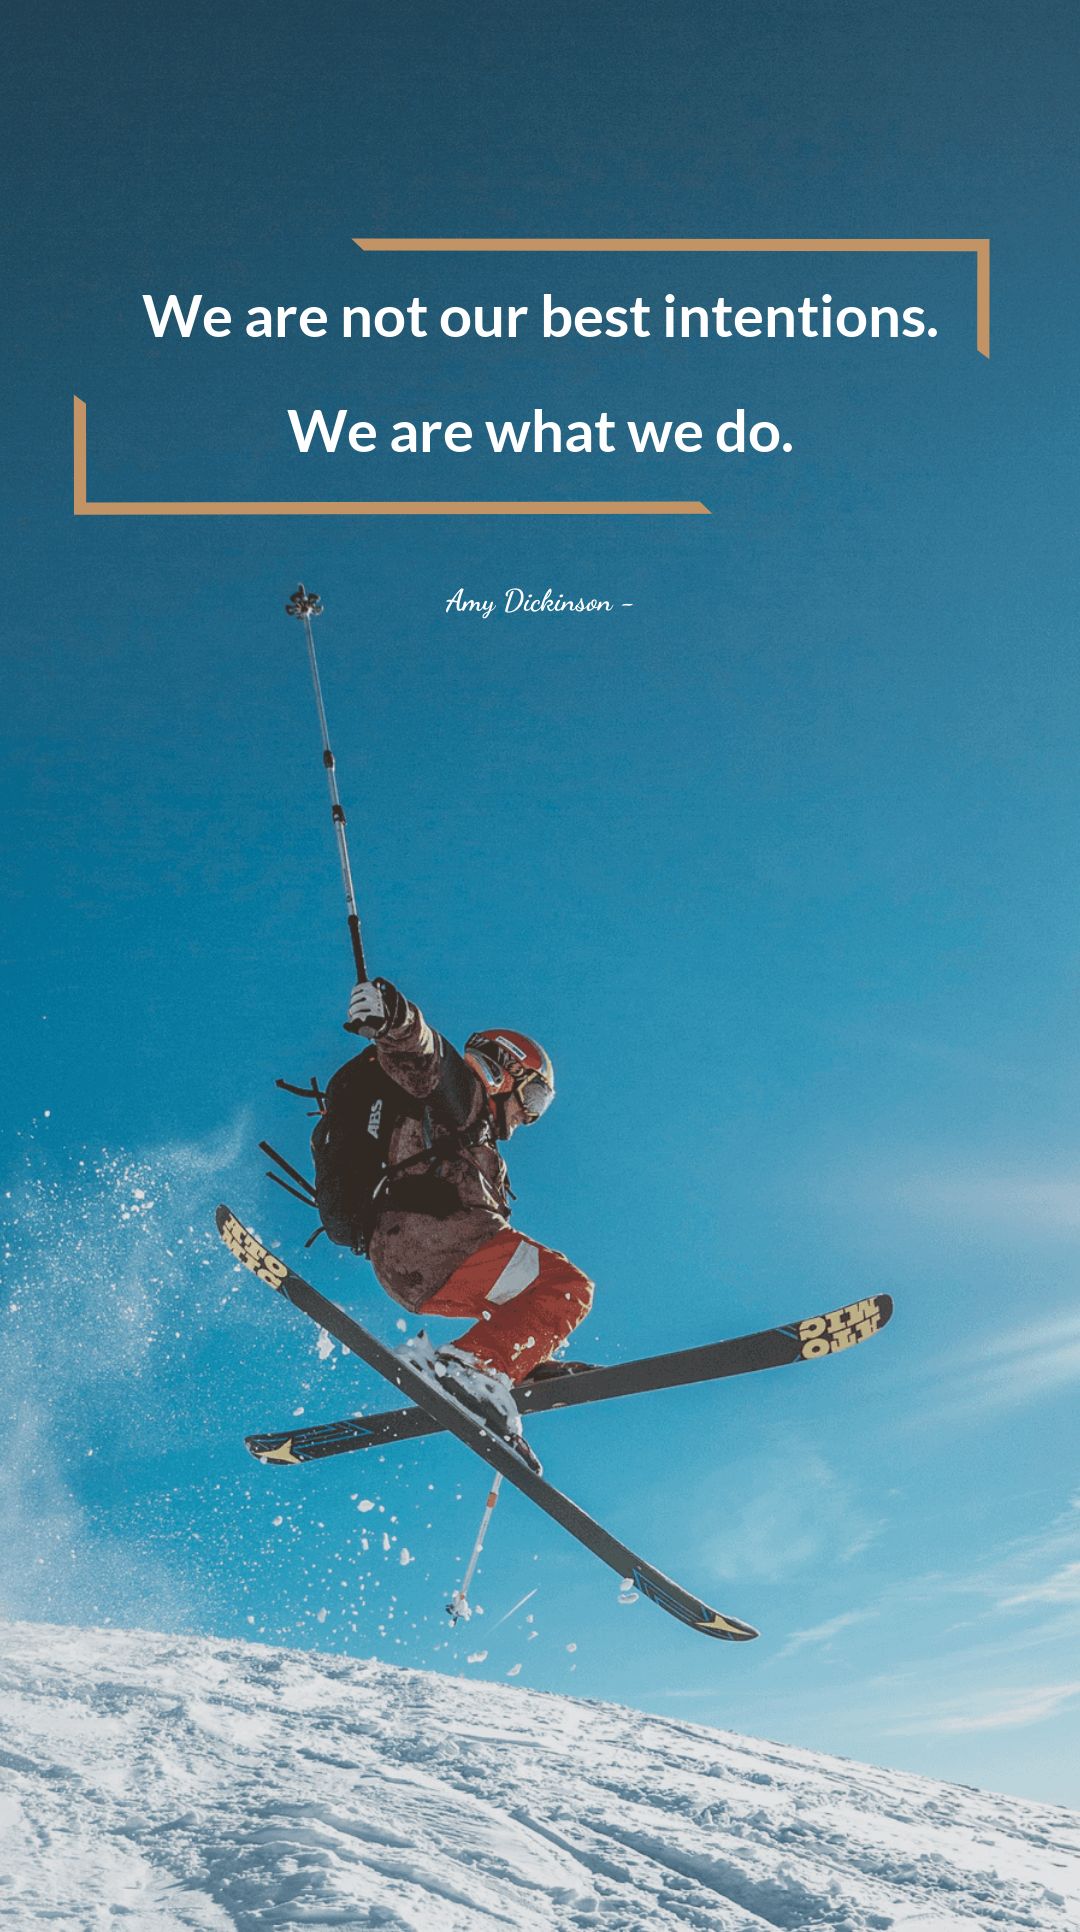 Amy Dickinson - We are not our best intentions. We are what we do.